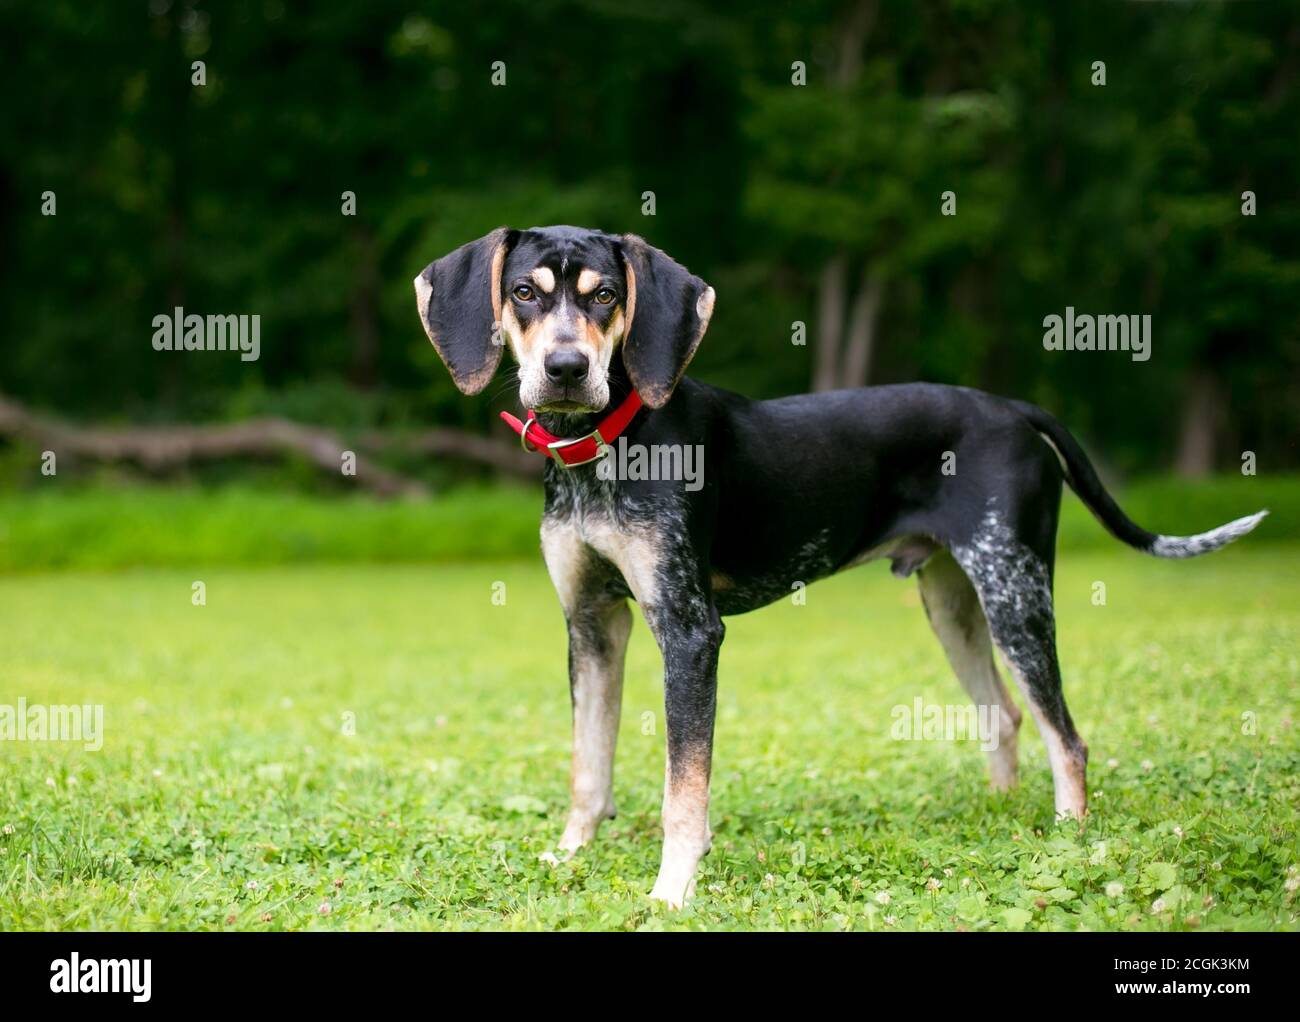 A Bluetick Coonhound dog outdoors wearing a red collar and looking at the camera Stock Photo